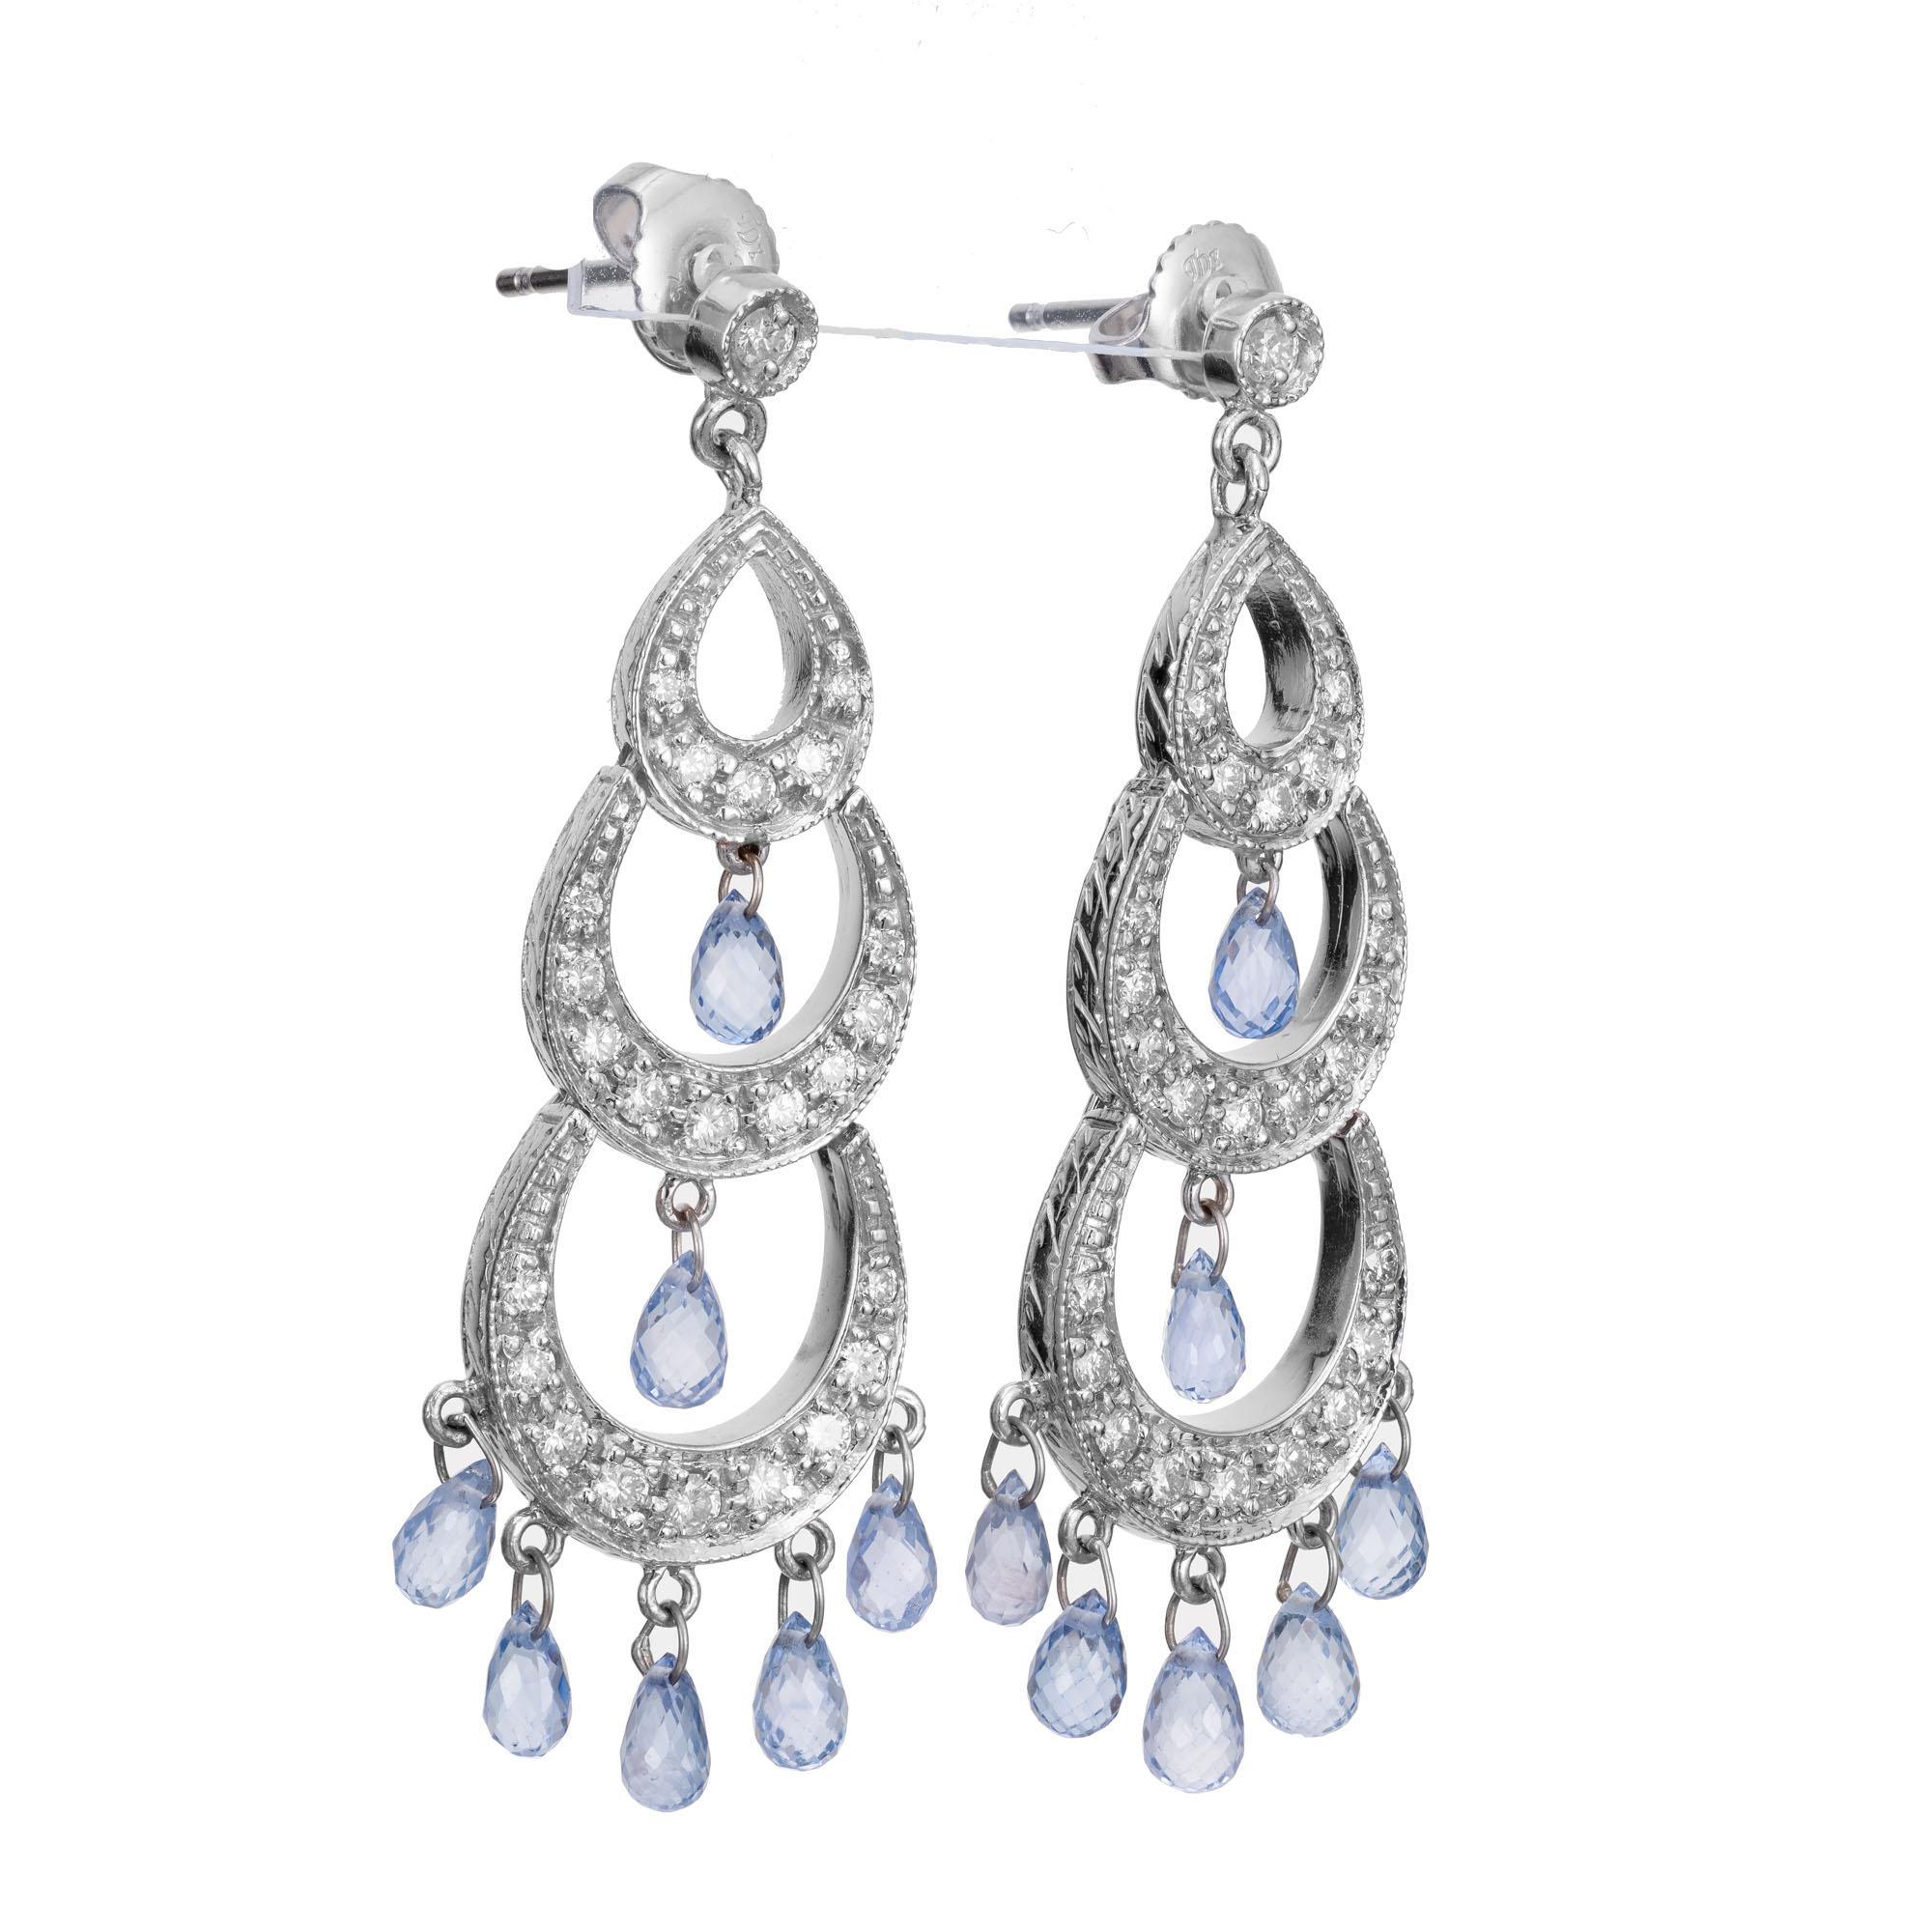 Elegant Lavender sapphire and diamond chandelier style earrings. 14 natural lavender briolette dangles accented with 44 full cut round diamonds set in 18k white gold.  

14 natural lavender sapphire briolette approx. total weight 7.00cts. 
44 full